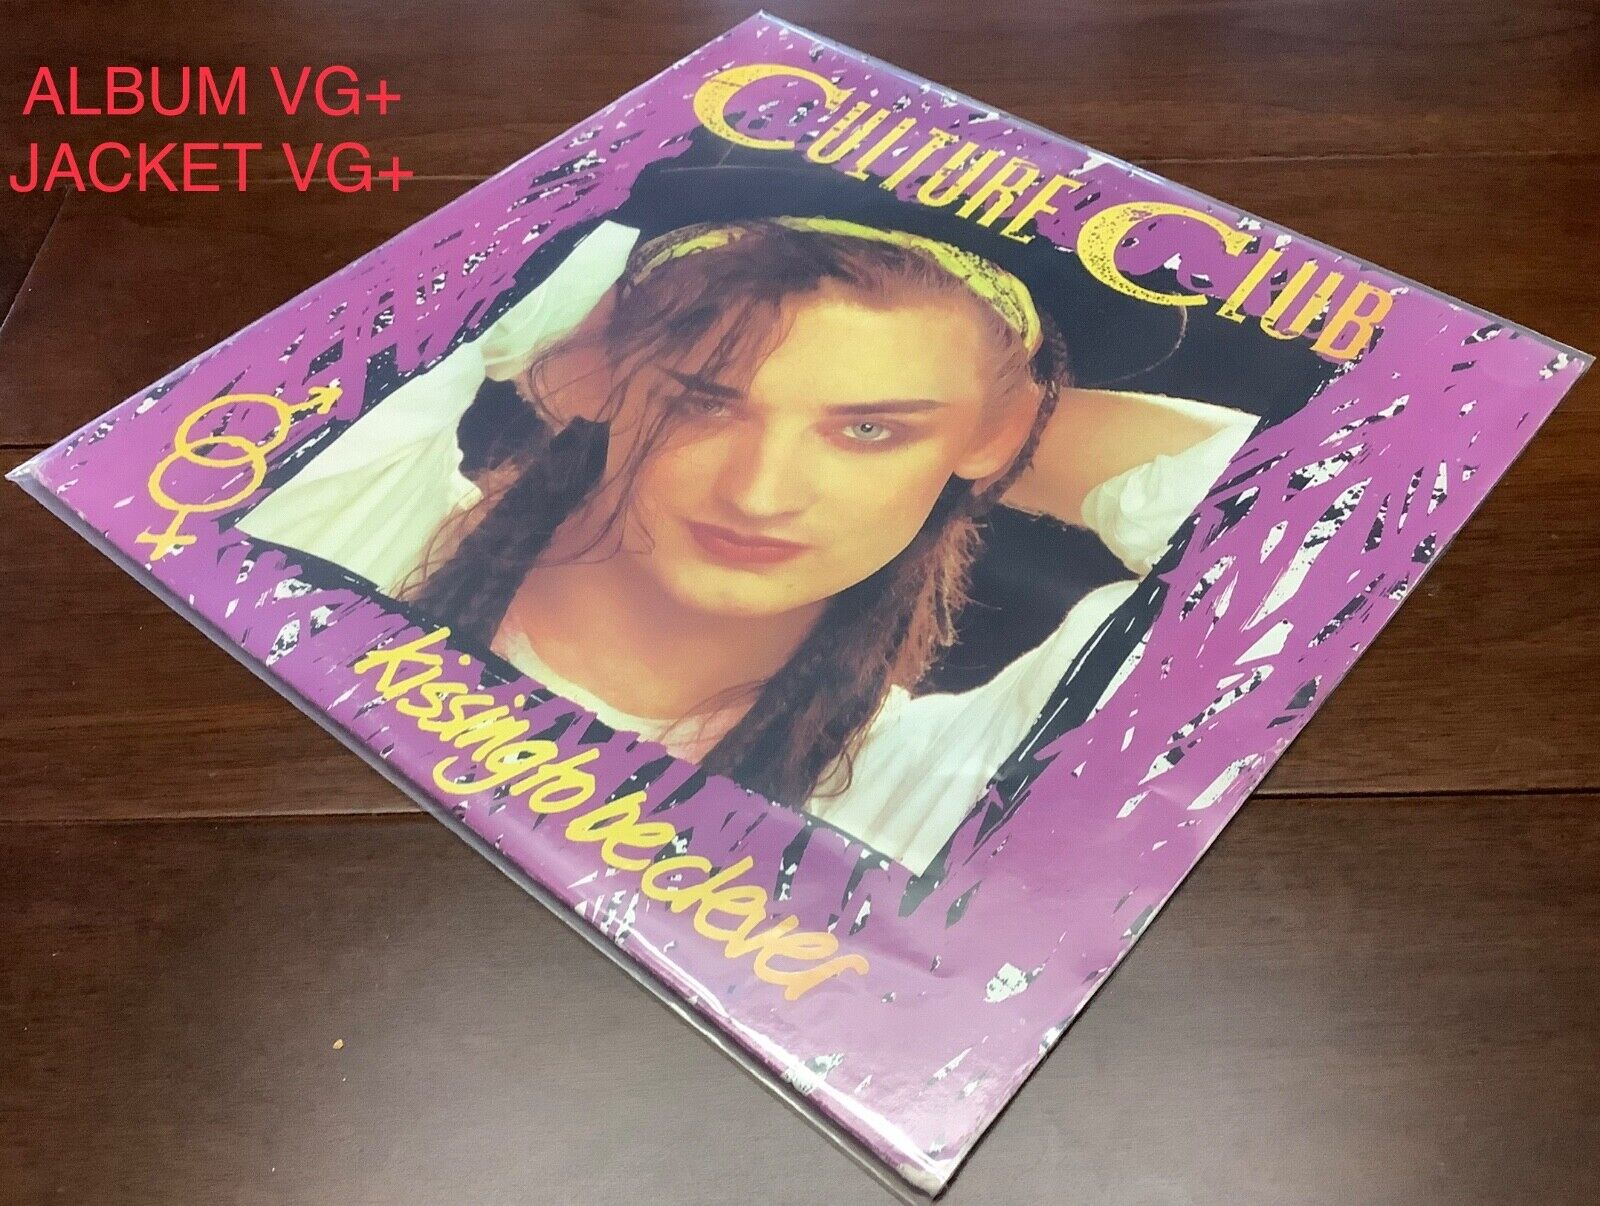 Title:Culture Club (Kissing To Be Clever):Classic Rock Vinyl Records/LPs/Albums/R&B/Blues/Jazz/Classical/Lot/60s 70s 80s